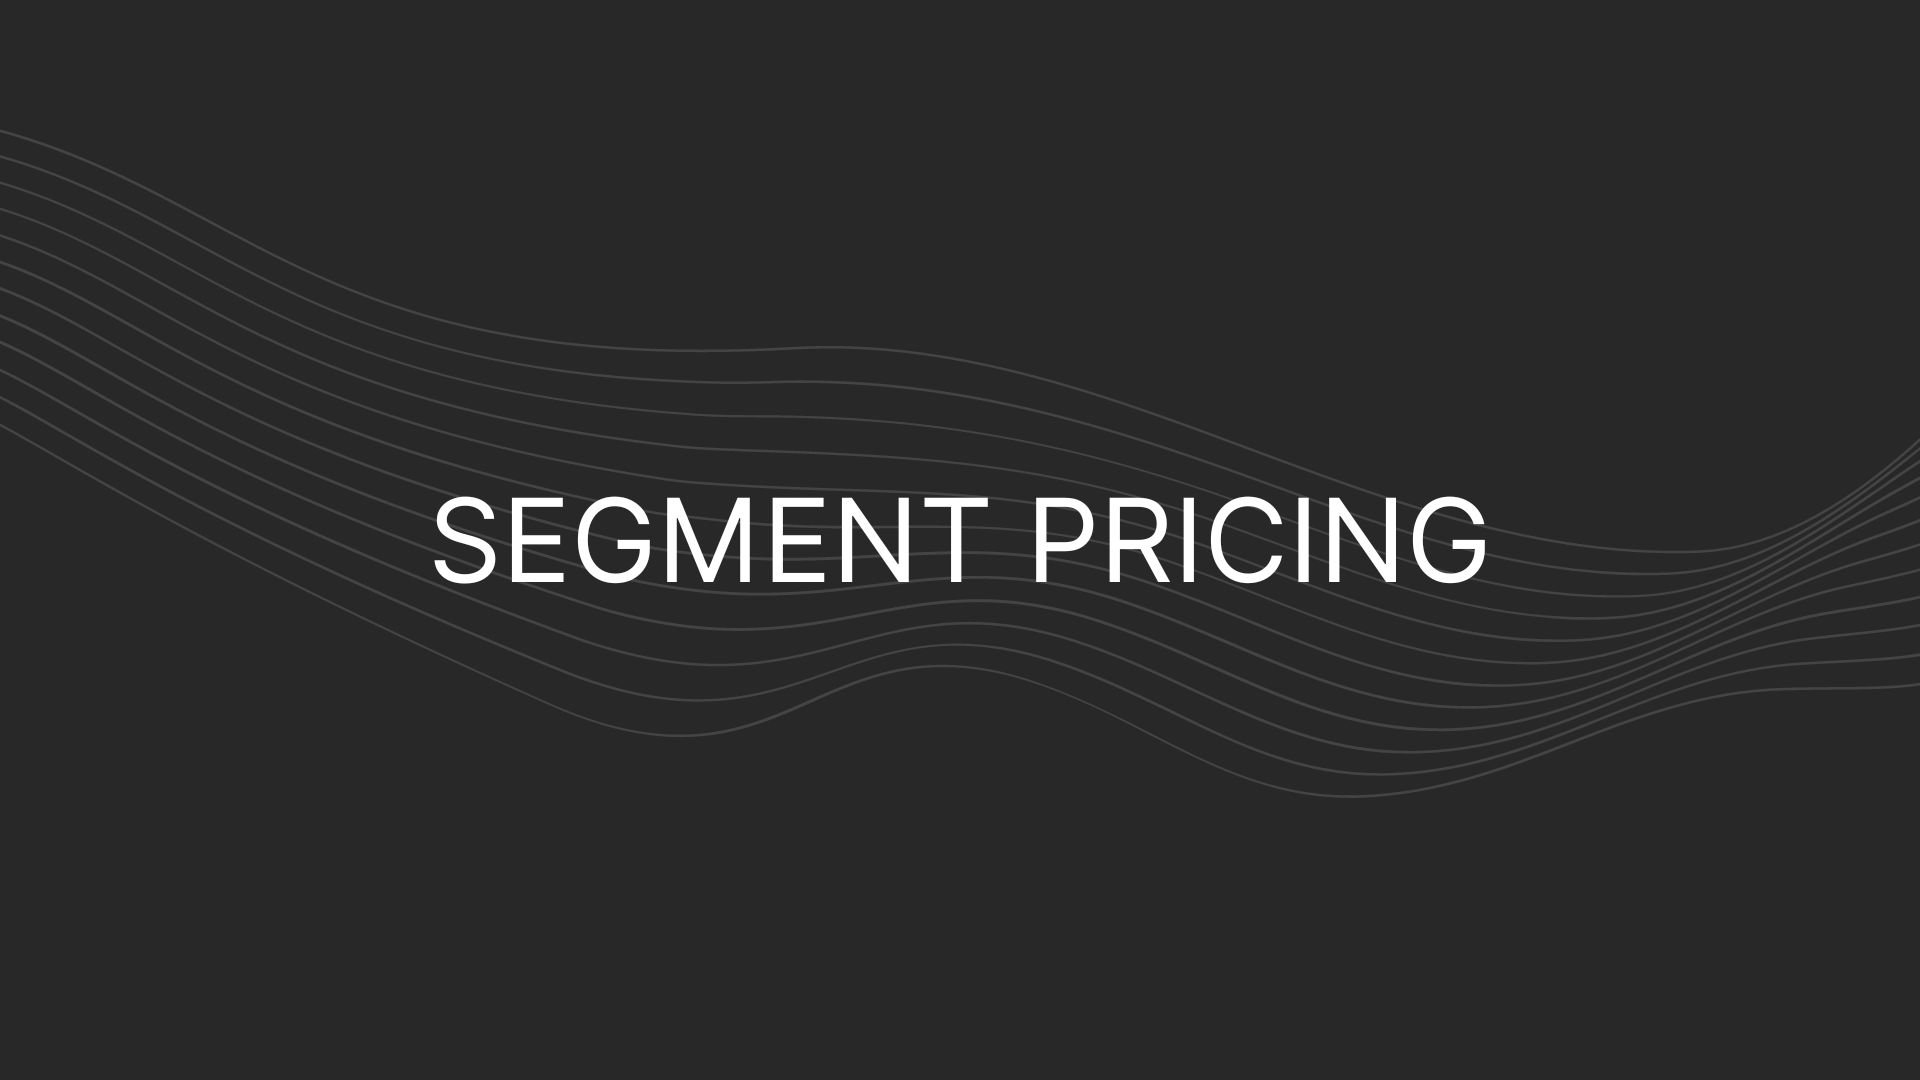 Segment Pricing – Actual Prices for All Plans